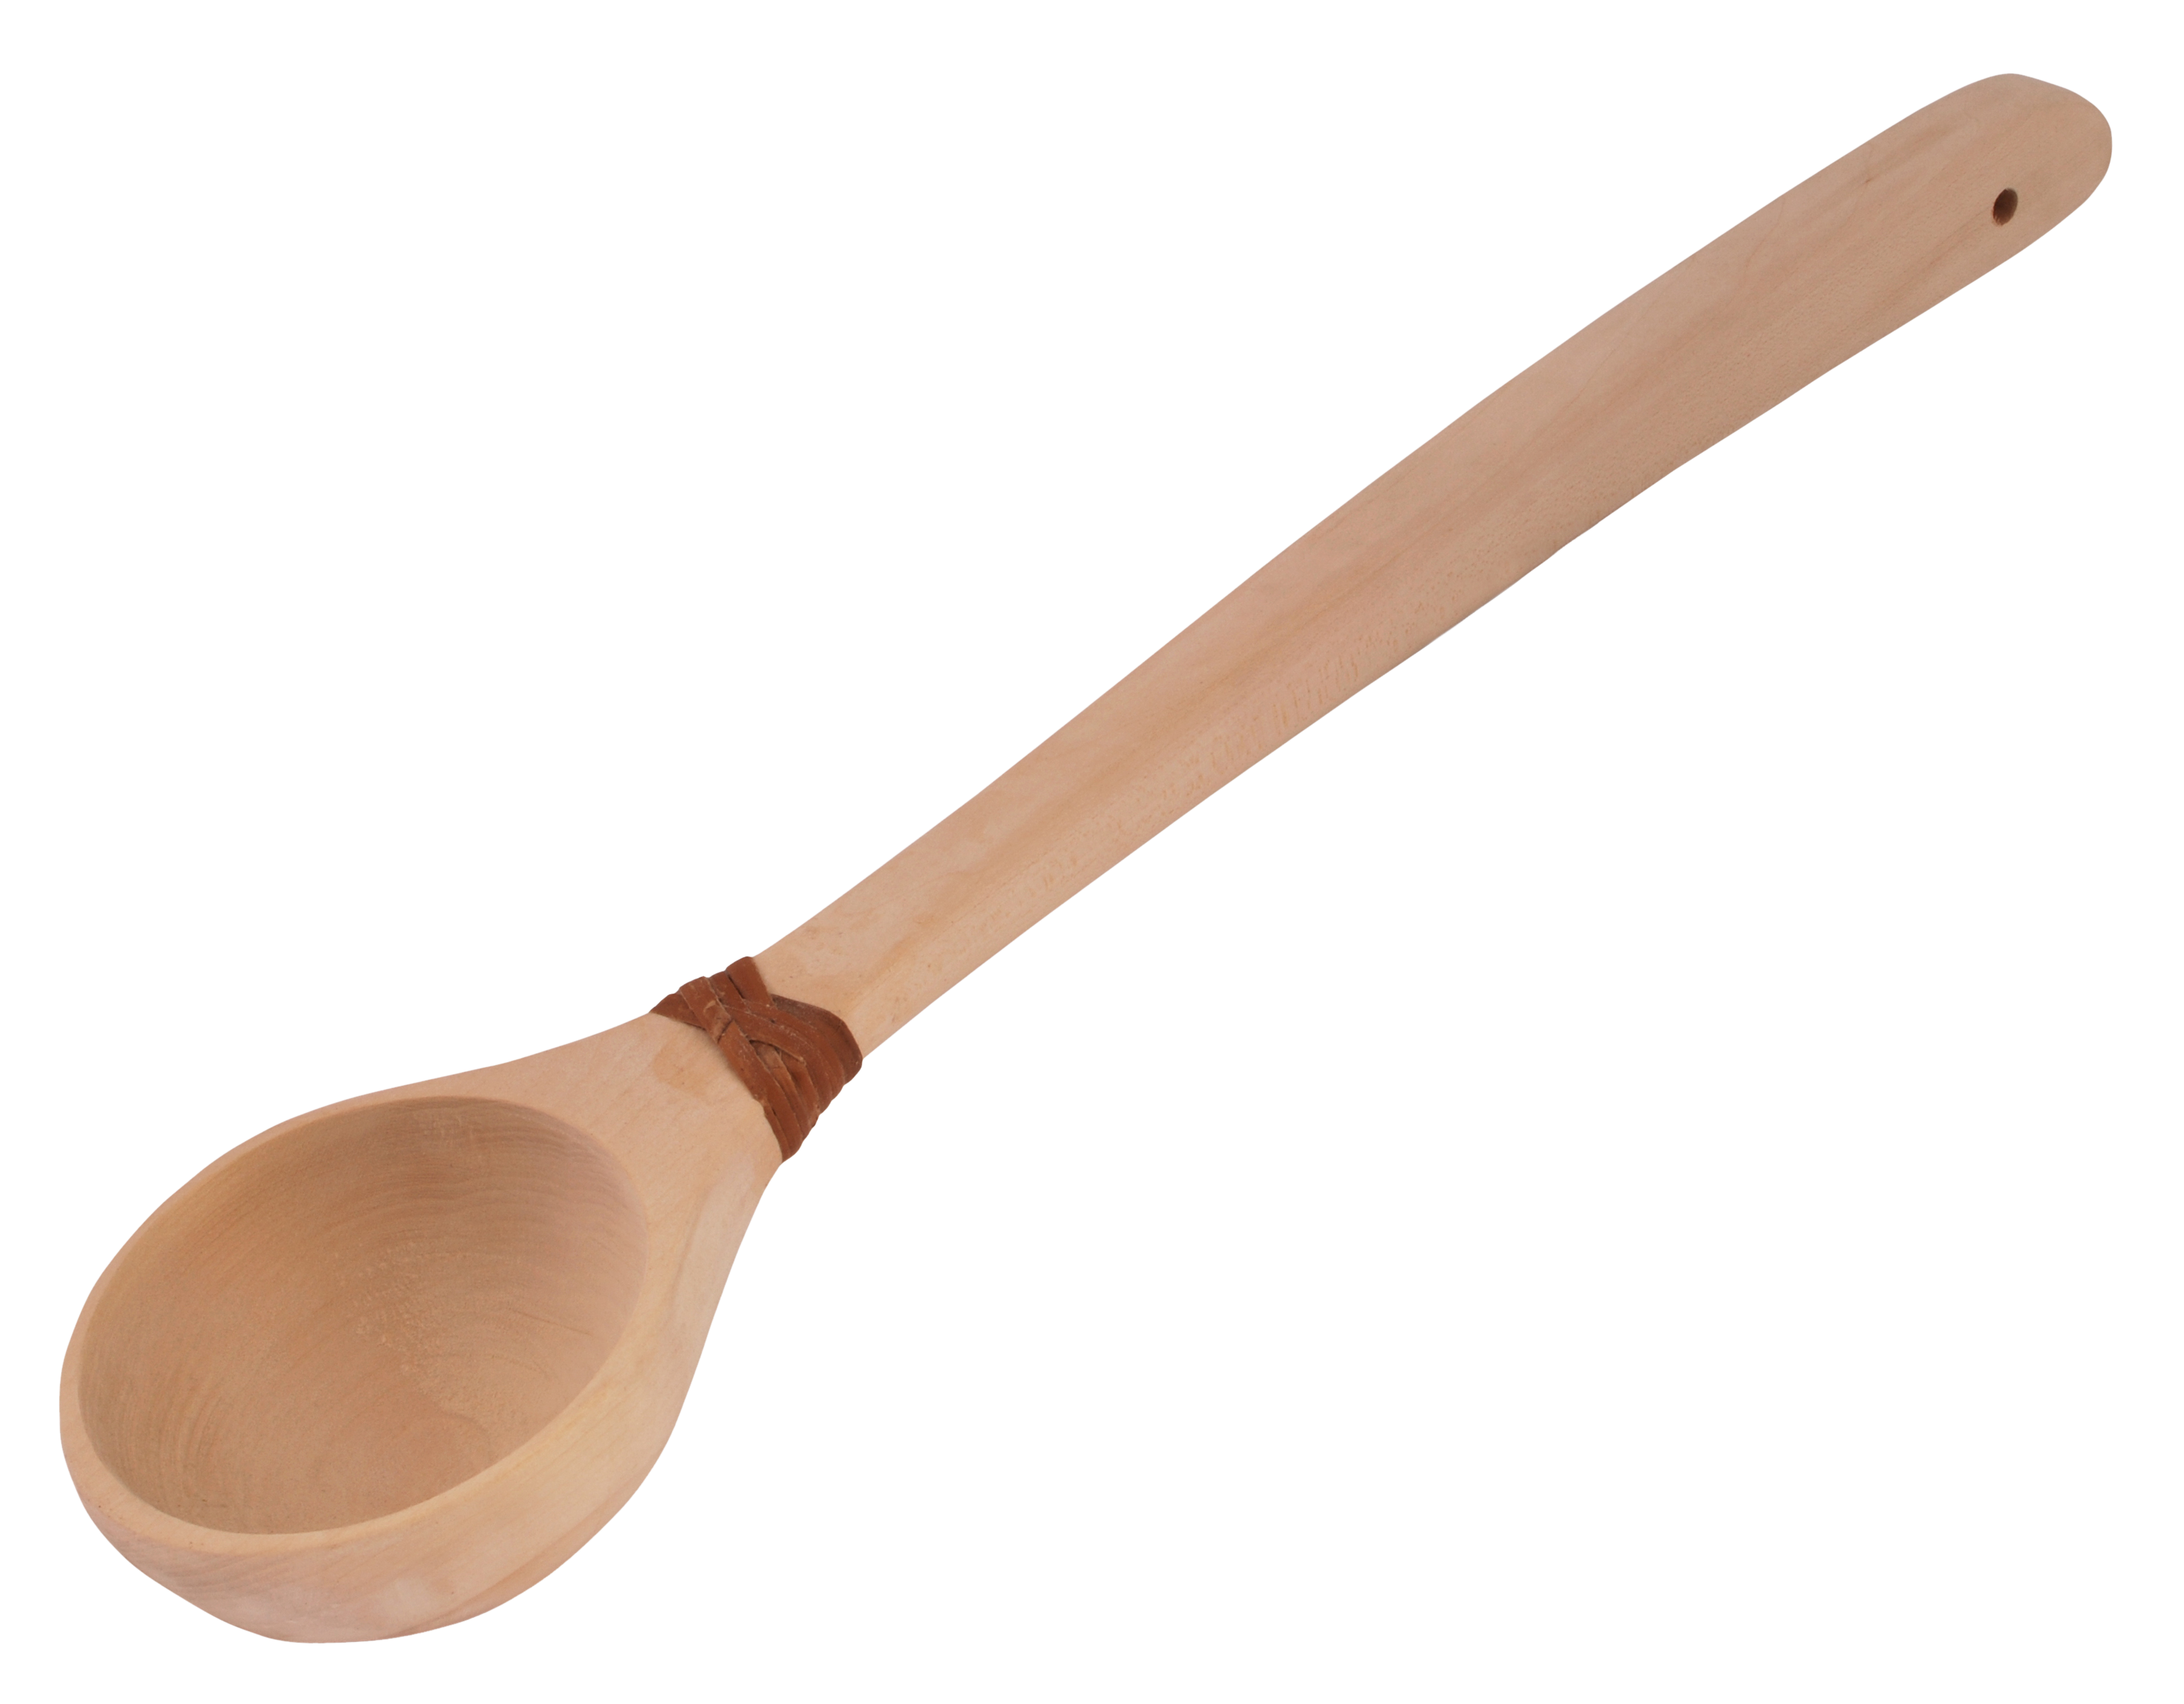 Wooden Spoon PNG File SVG Clip arts